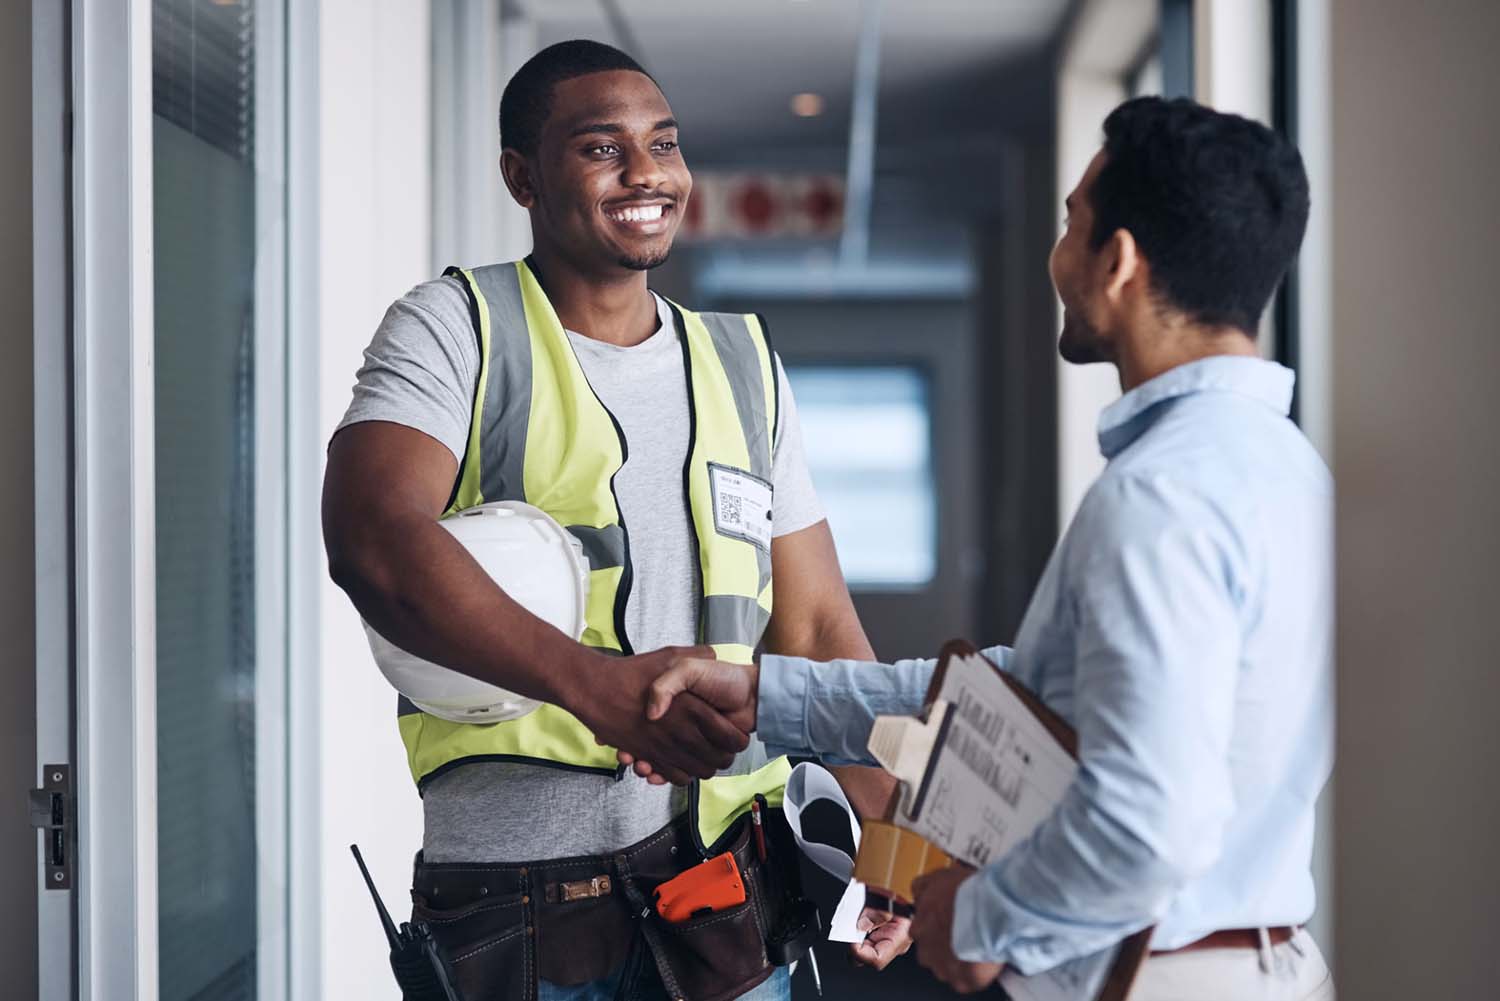 How to Find Top Contractors for Your Next Home Project